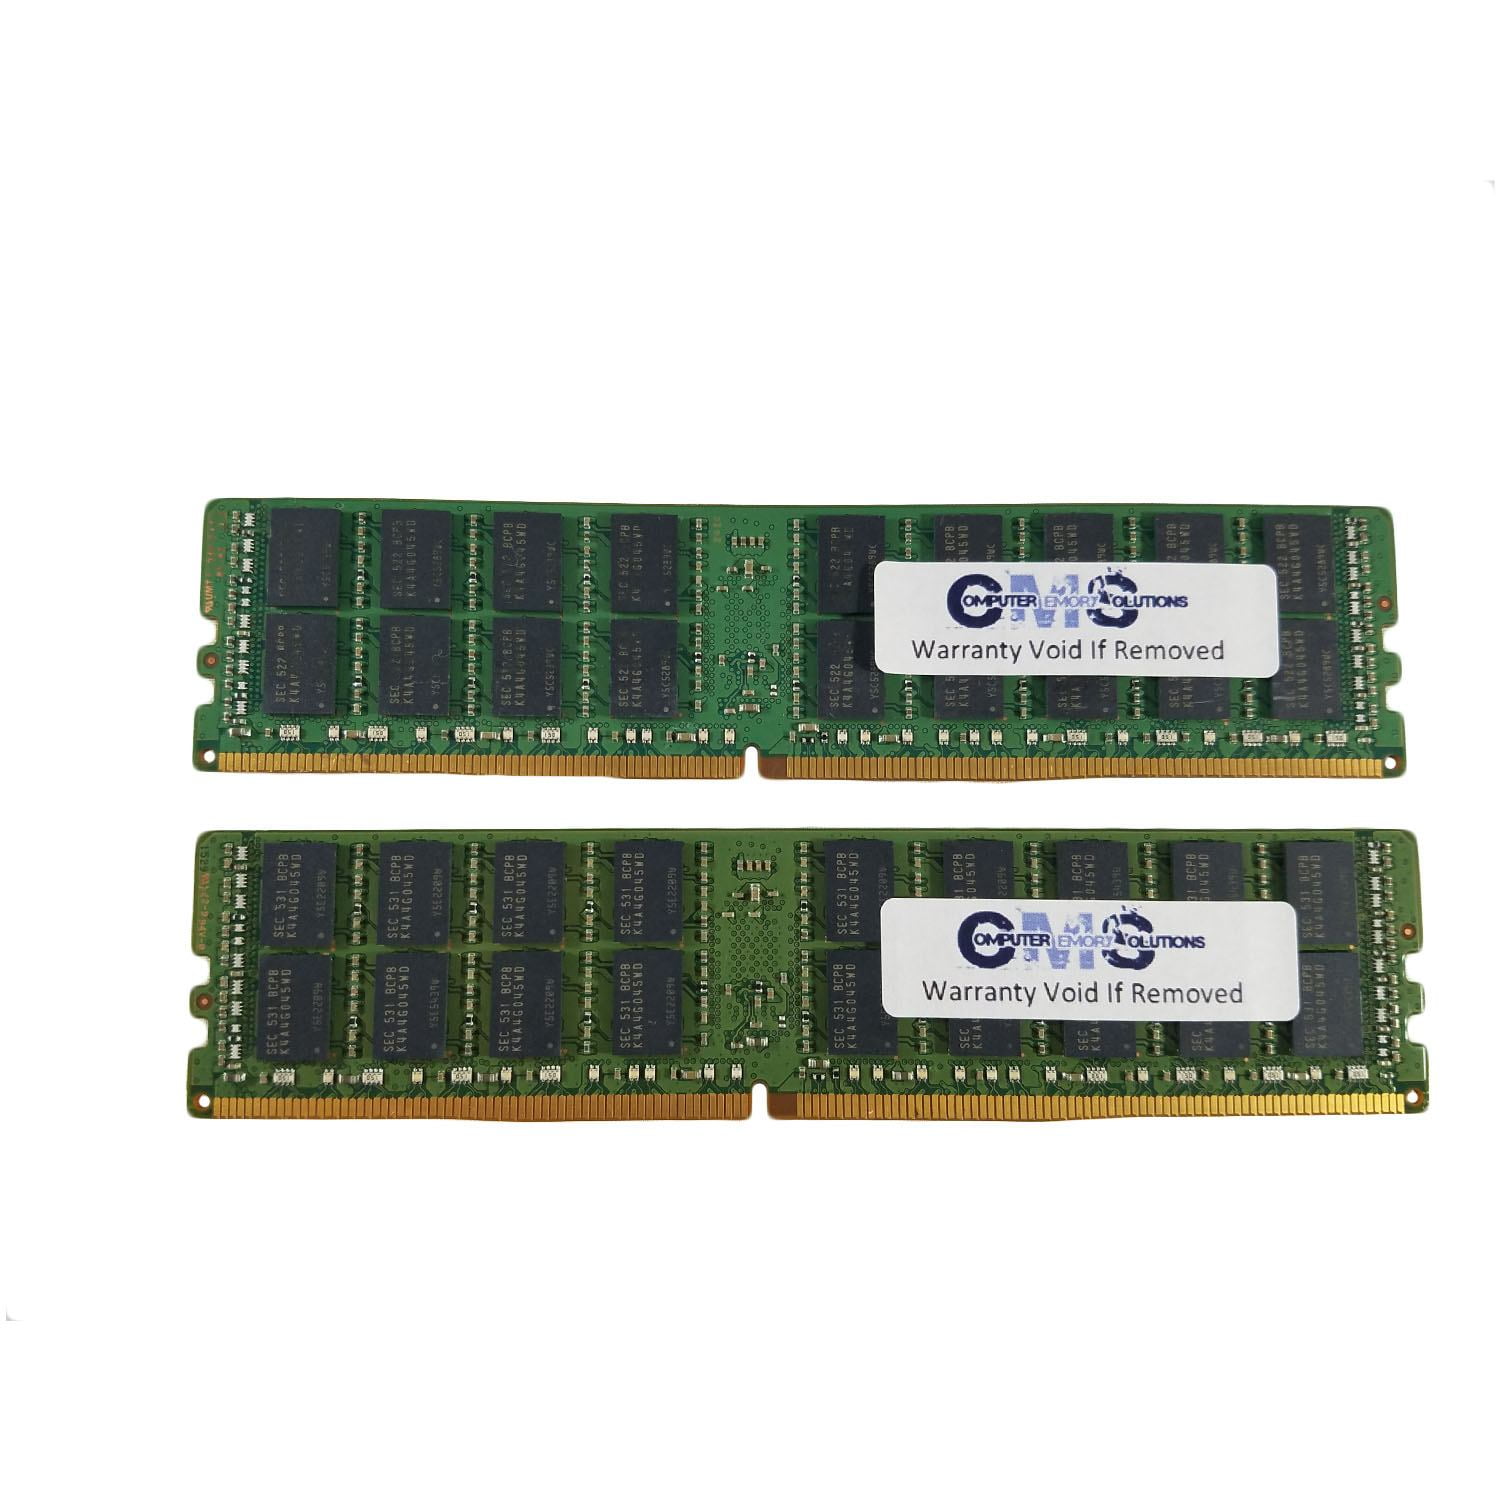 CMS 64GB (4X16GB) Memory Ram Compatible with Asus/Asmobile X99-A II,  X99-DELUXE, X99-E, X99-E WS/USB 3.1, X99-E-10G WS, X99-WS/IPMI Motherboards  - 